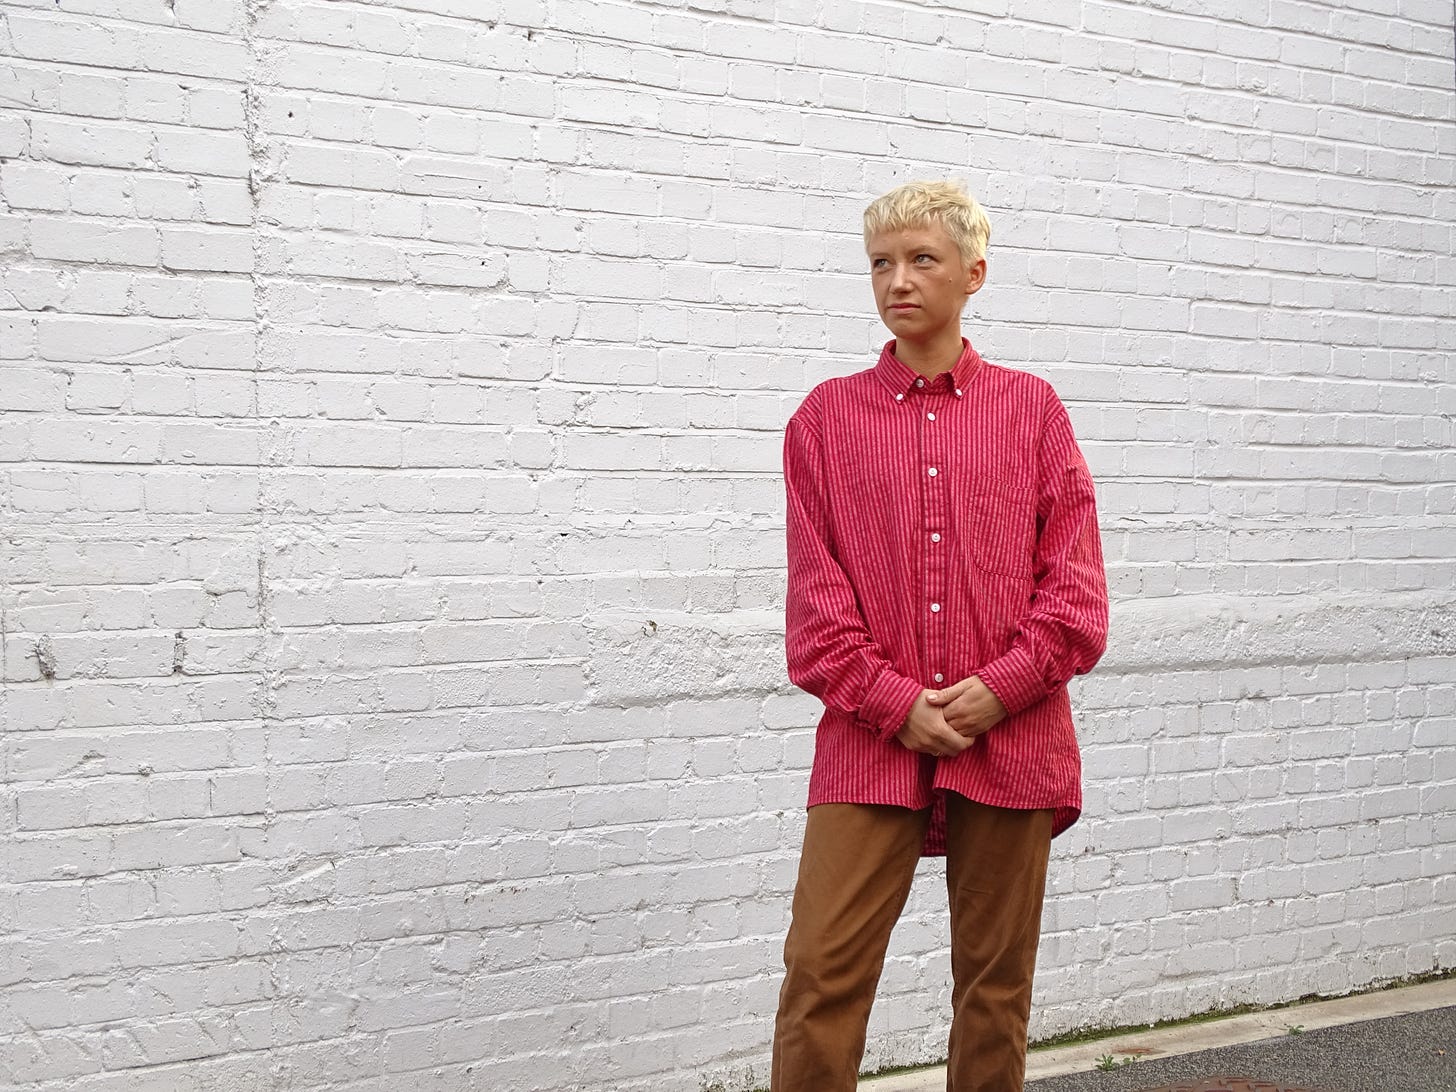 Photograph of author Alice Hattrick from the knee up, standing in front of a brick wall, wearing a striped button-down shirt with a cropped blonde haircut.